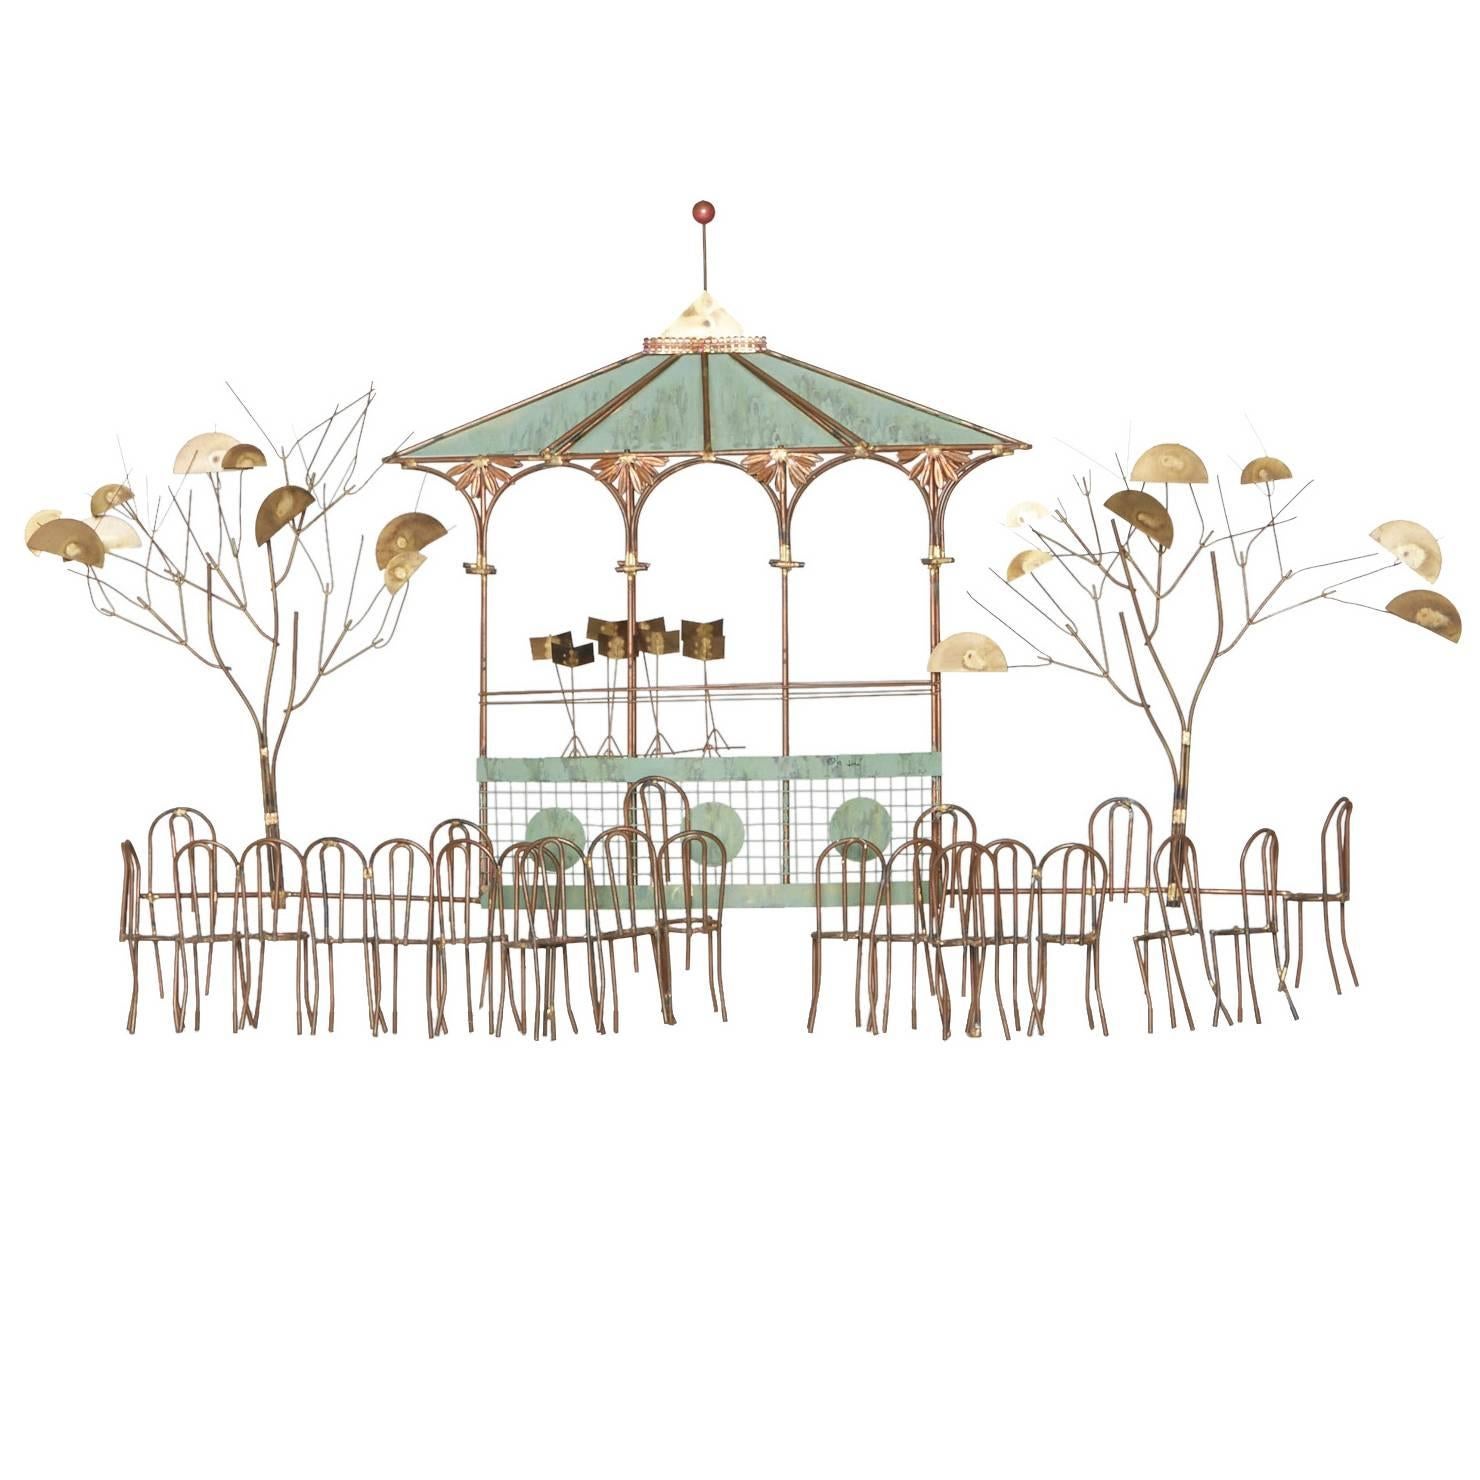 Bandstand Wall Hanging by C. Jeré for Artisan House - ON SALE